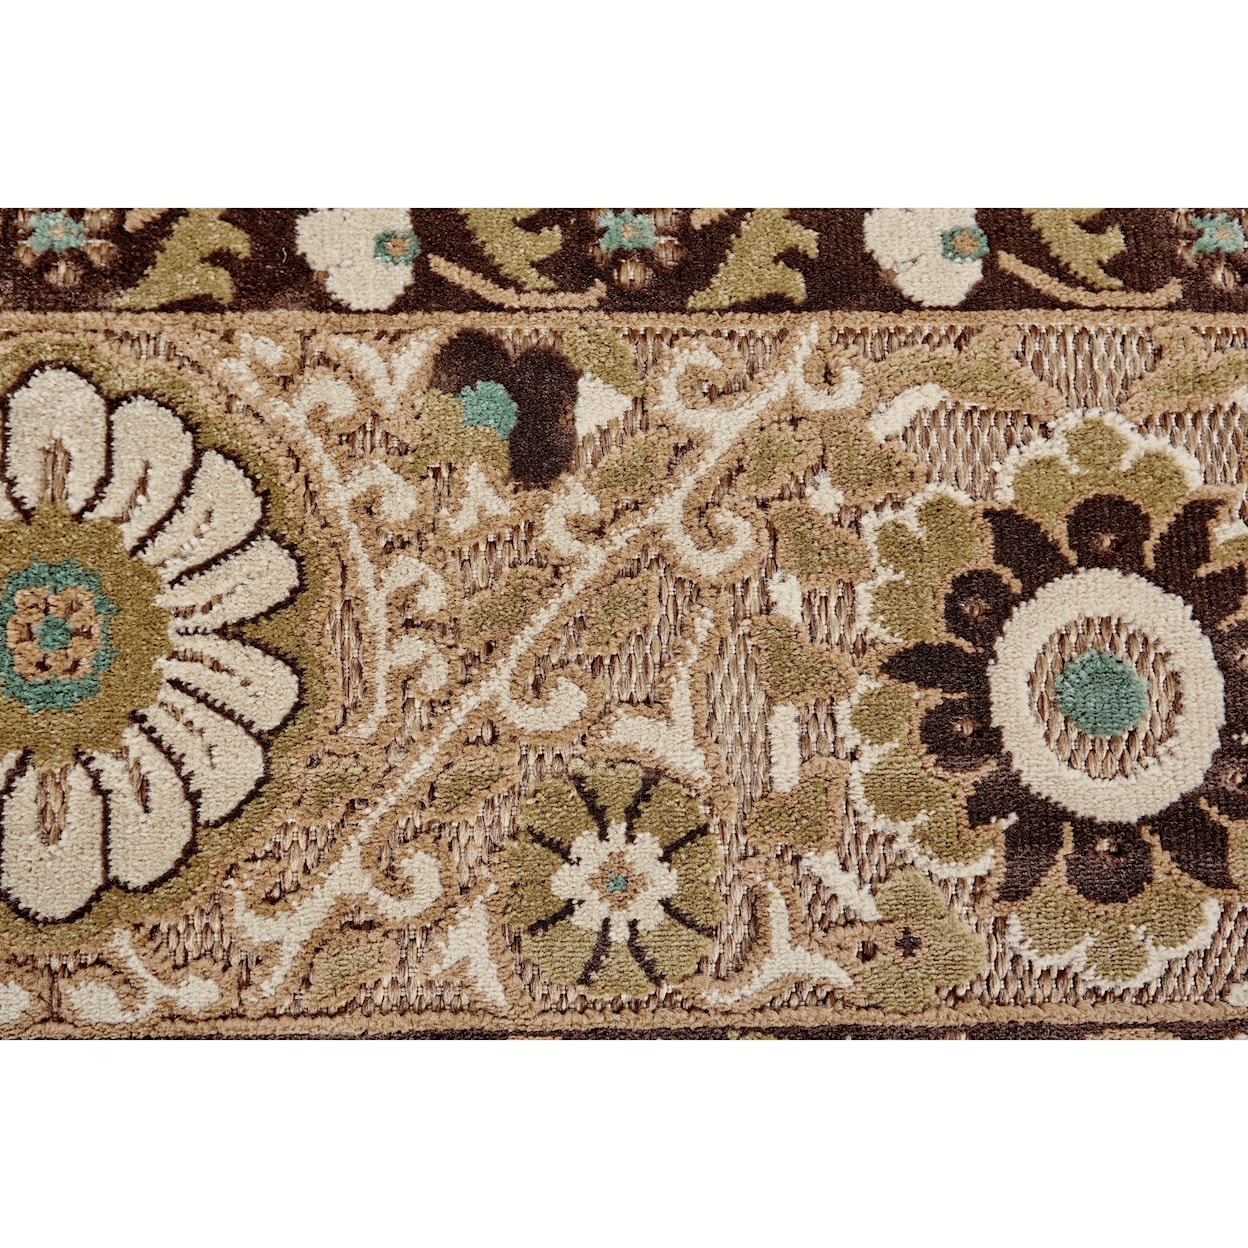 Feizy Rugs Lucka Tan/Brown 5' X 7'-6" Area Rug